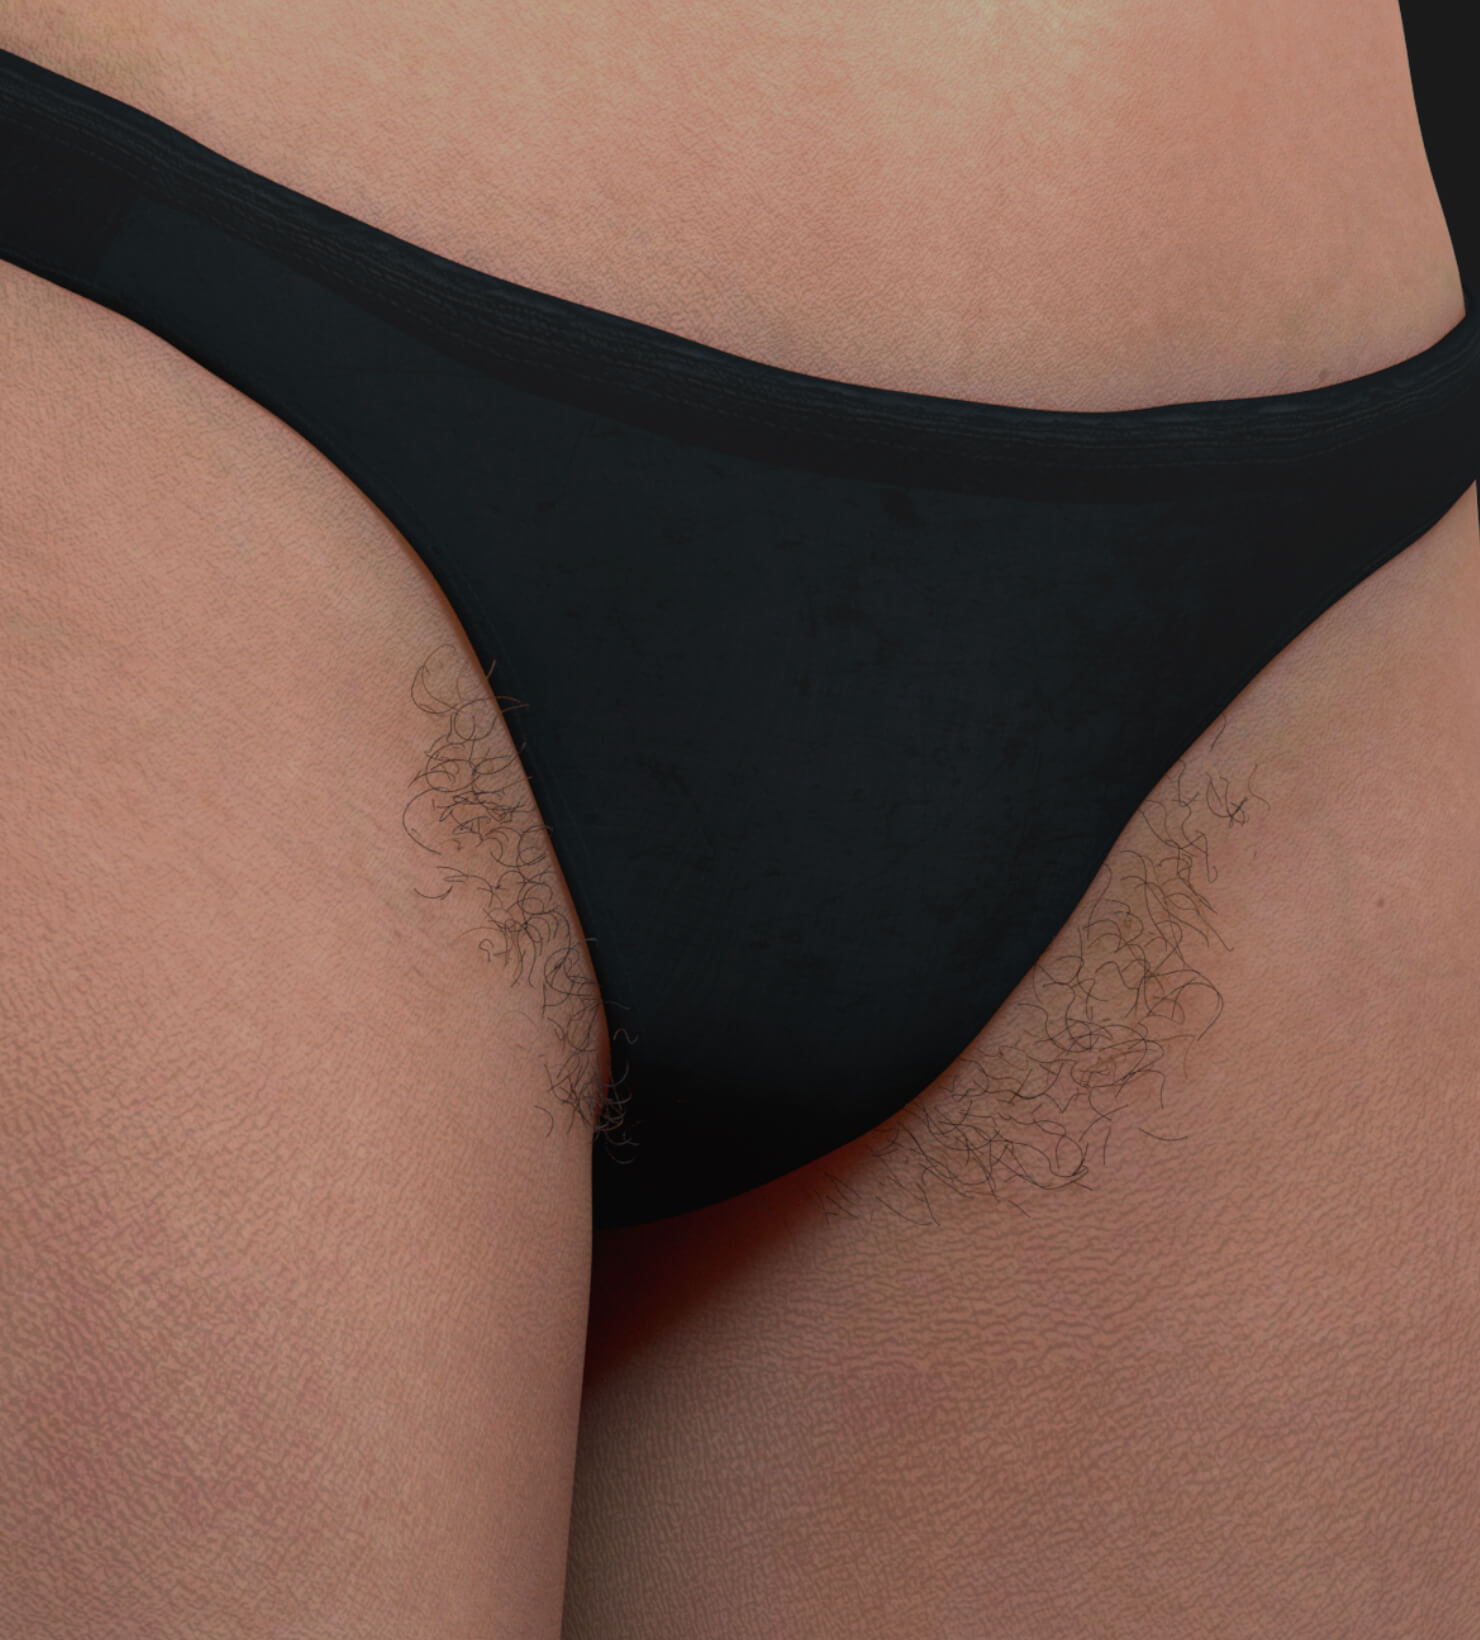 Clinique Chloé patient with unwanted hair to be treated with IPL permanent hair removal